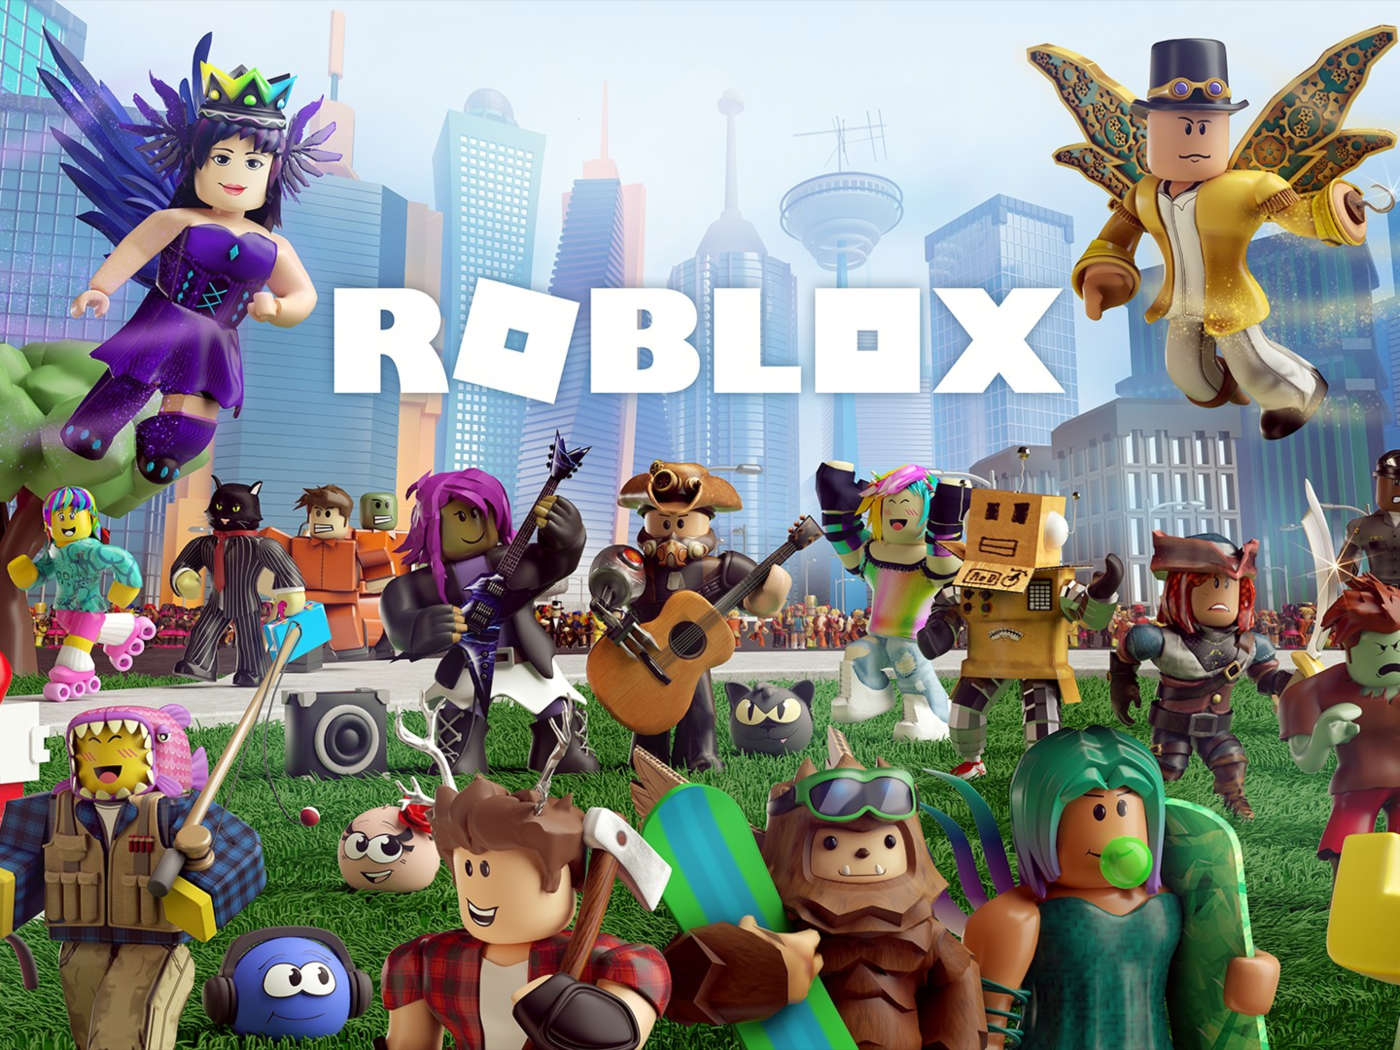 How to Play Roblox on an Oculus Quest 2